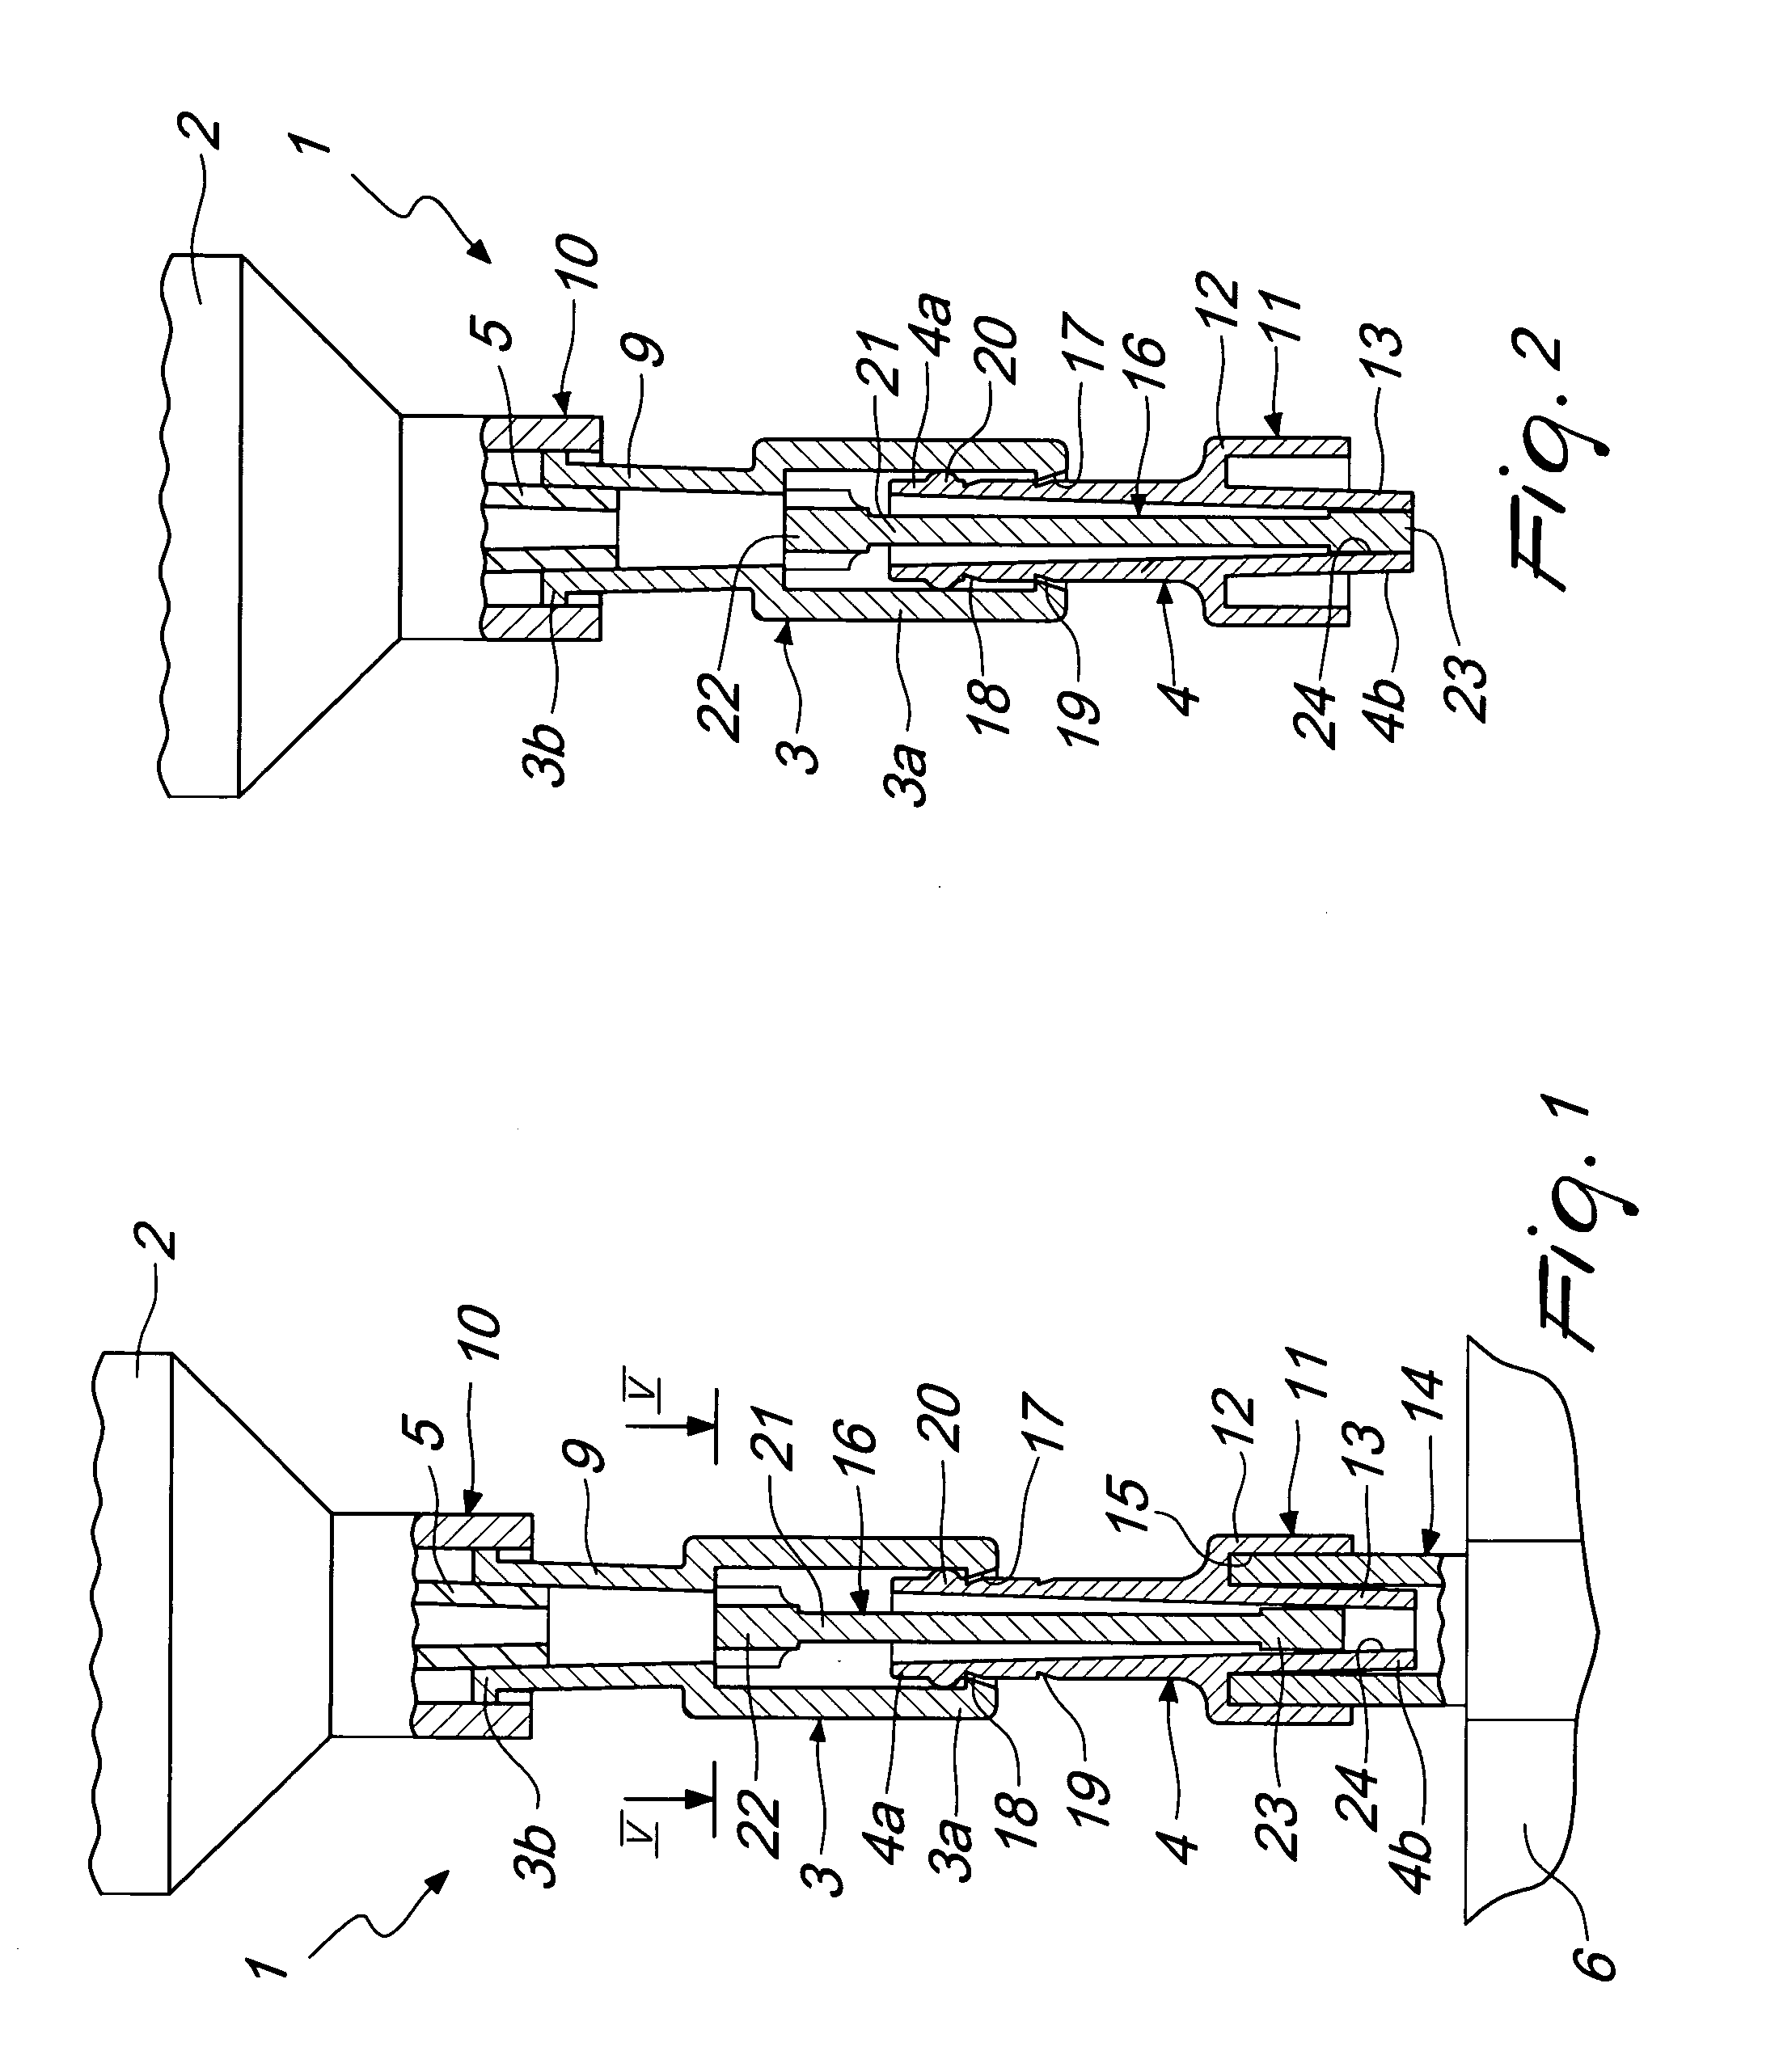 Closure device for containers or lines for administering medical or pharmaceutical fluids